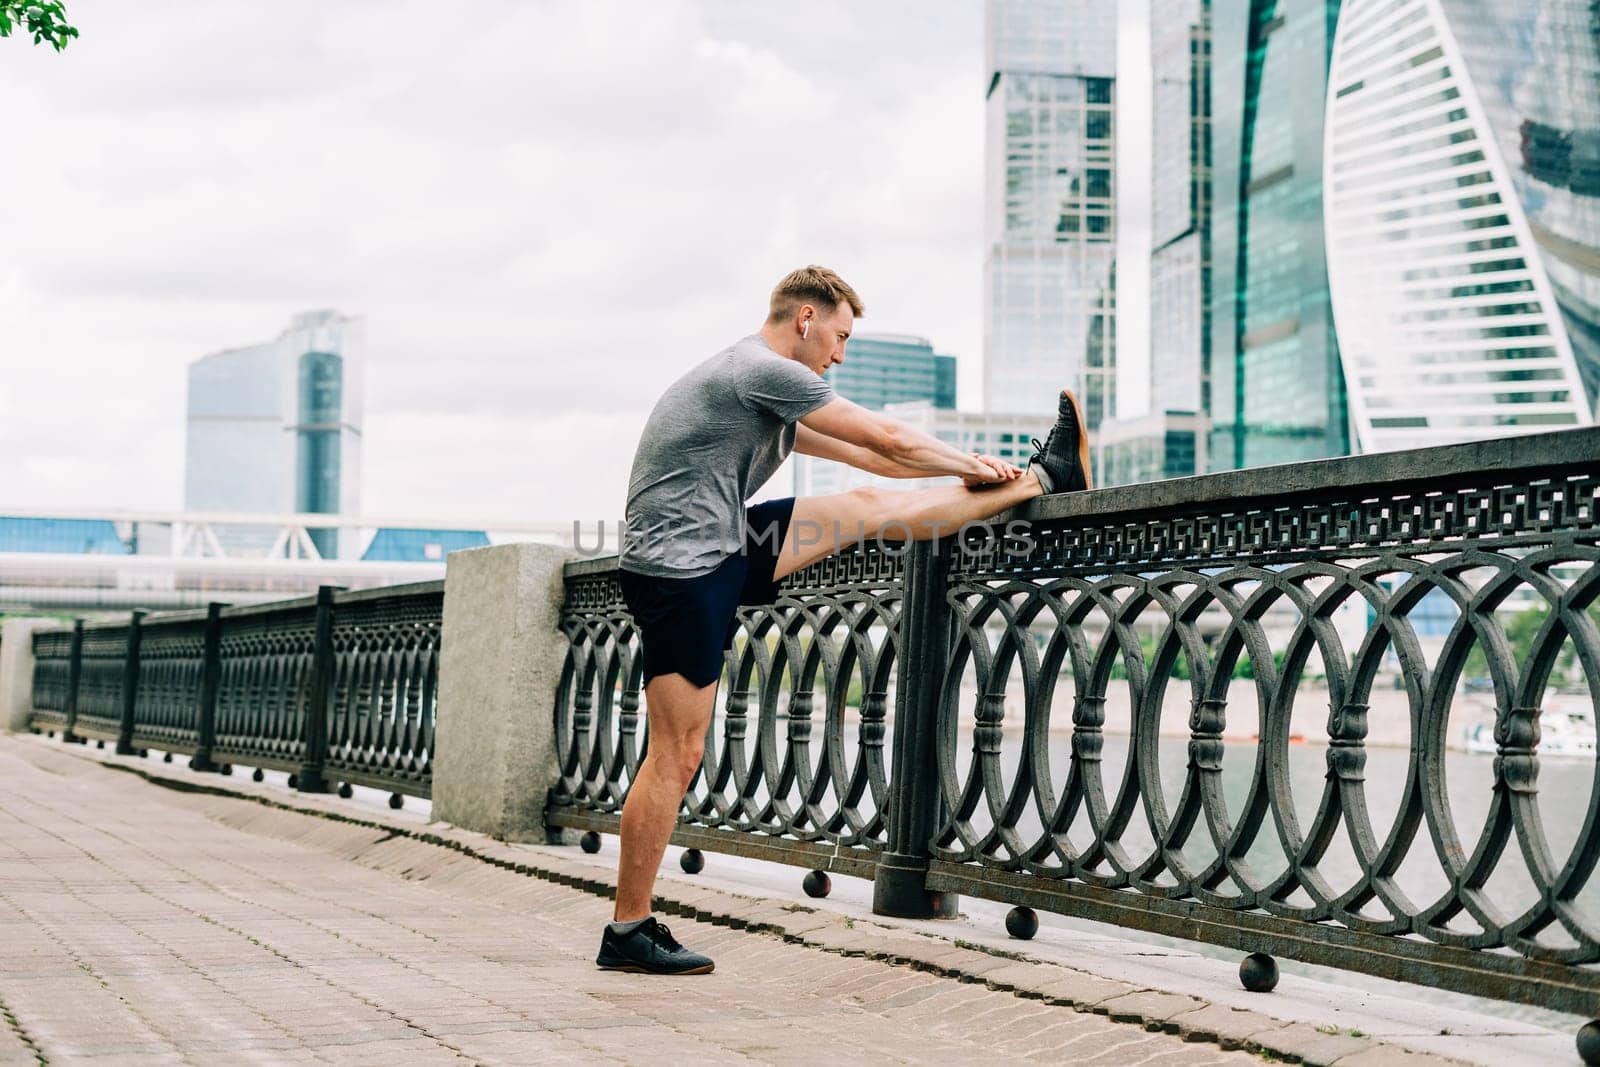 Young fitness man runner stretching legs before exercise run outdoors in city urban street. Healthy lifestyle and sport concept.